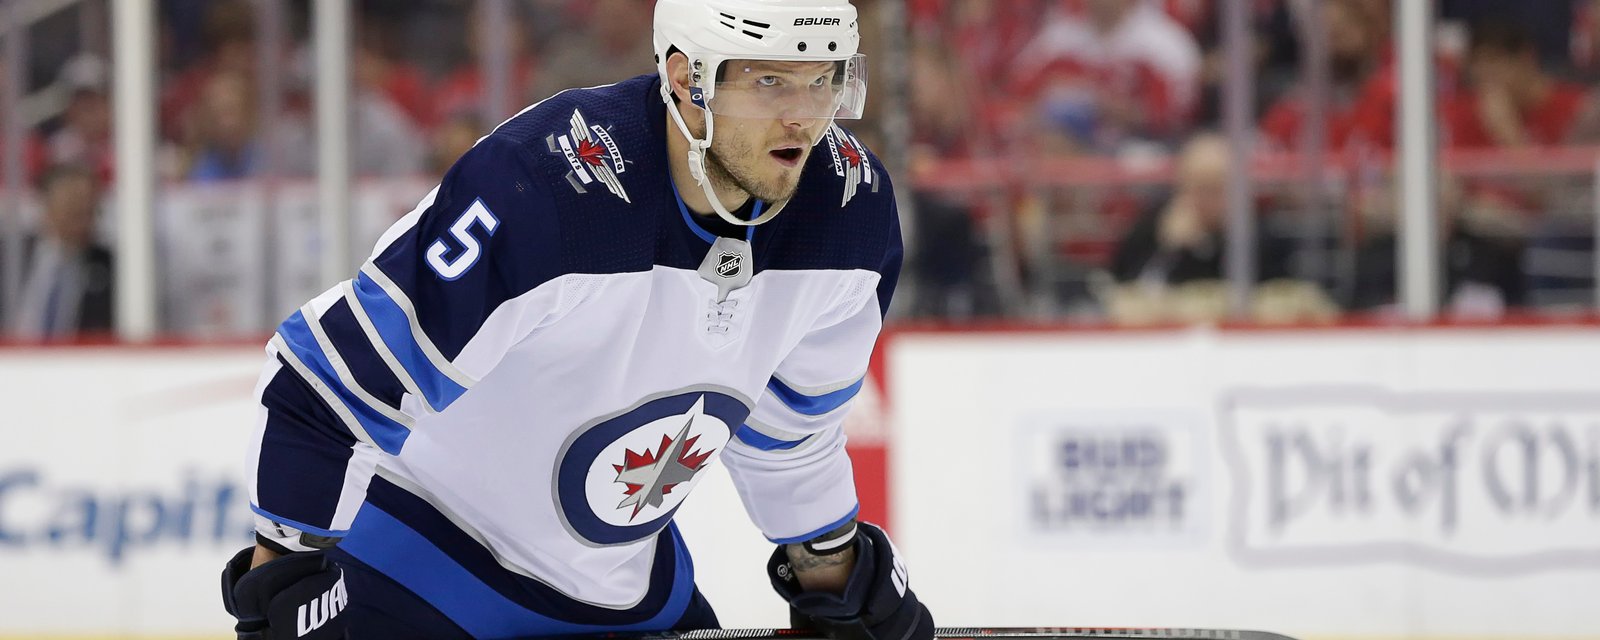 Dmitri Kulikov will be out of the Jets’ lineup long-term